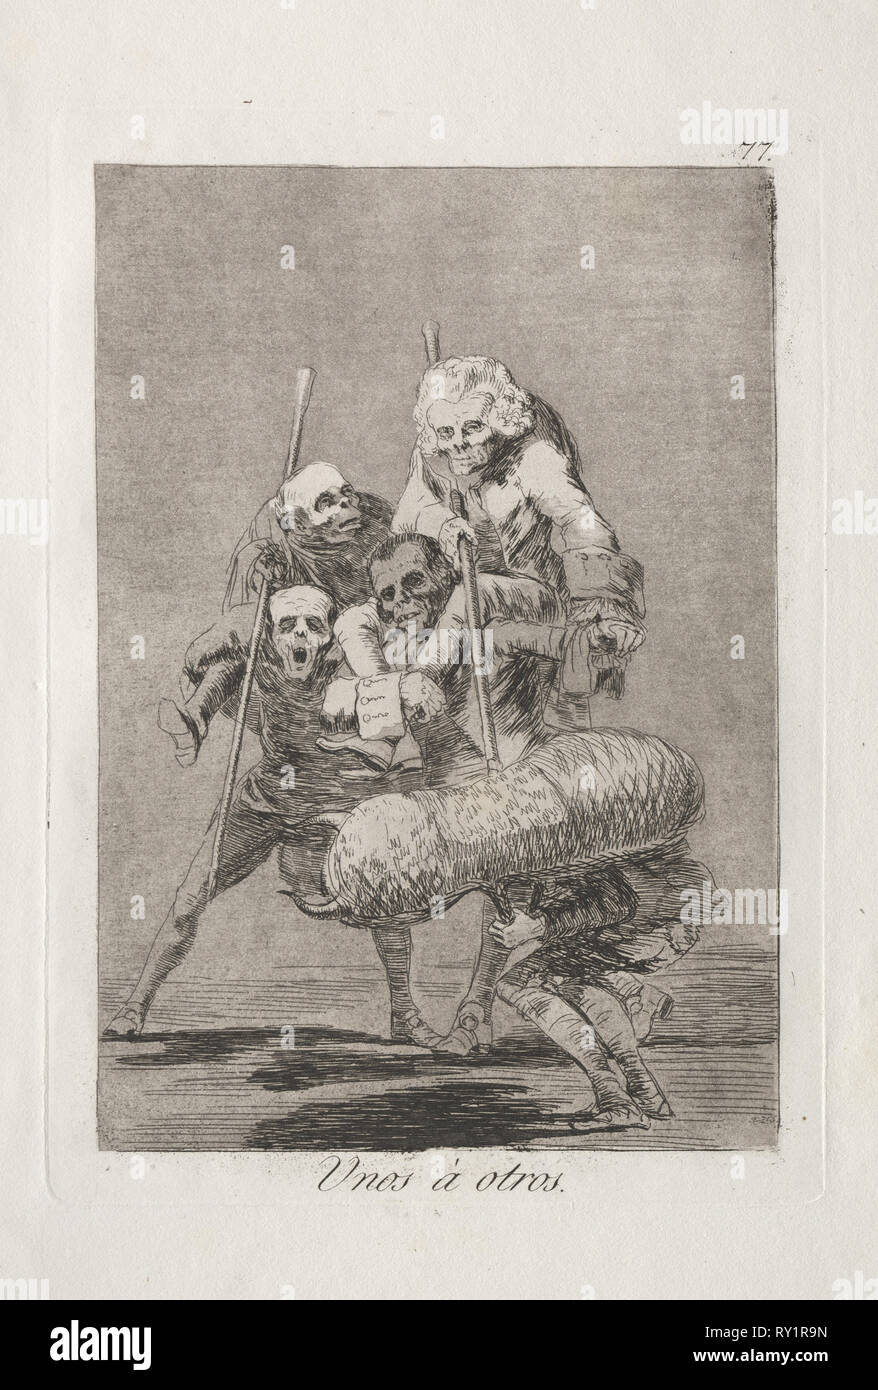 Caprichos:  What One Does to Another. Francisco de Goya (Spanish, 1746-1828). Etching and aquatint Stock Photo